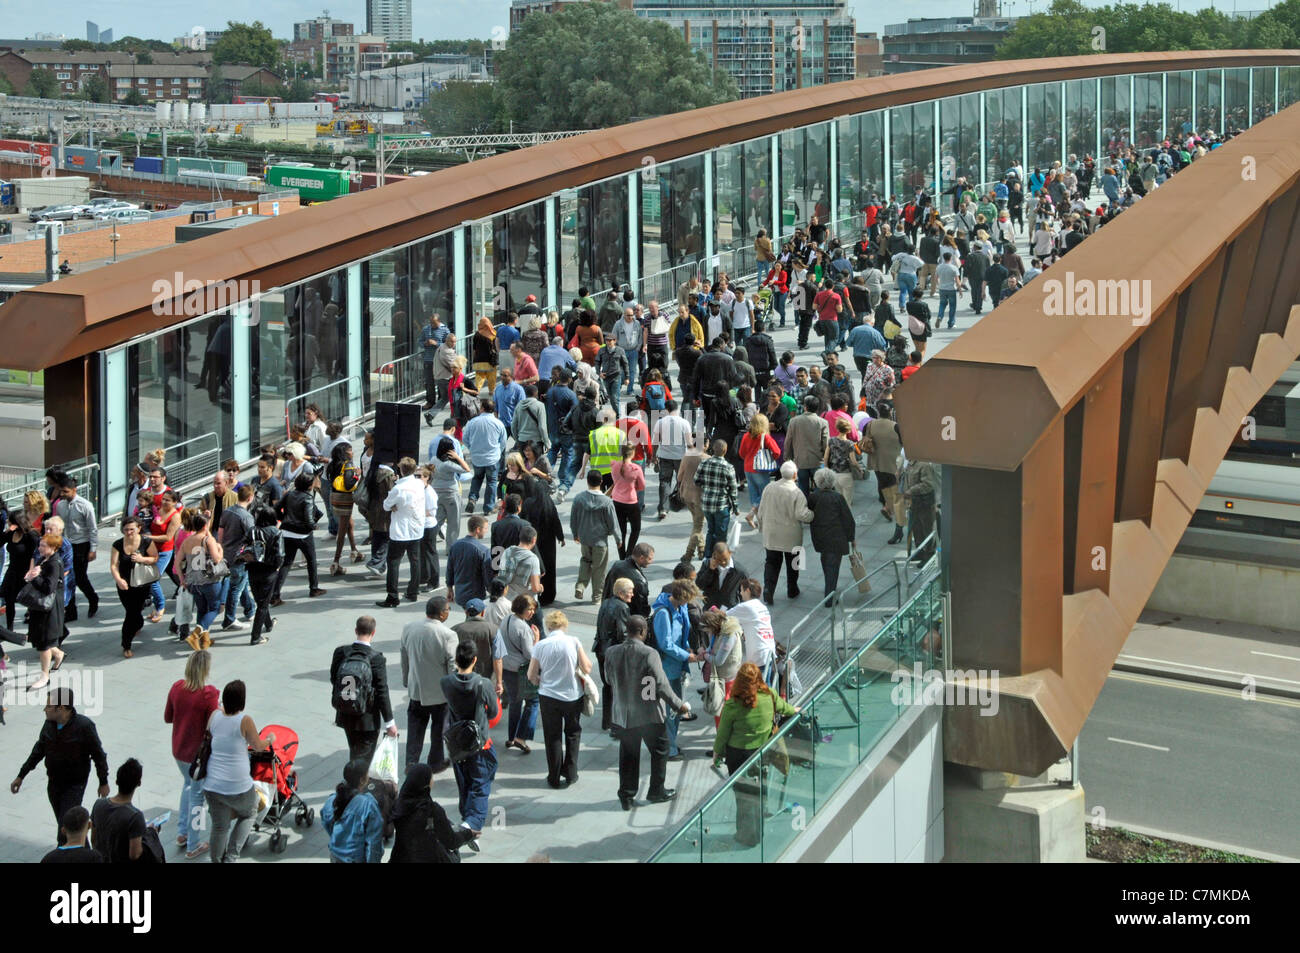 Crowd of people shoppers on railway footbridge & access link from Stratford town walking above train station at Westfield Shopping Centre East London Stock Photo